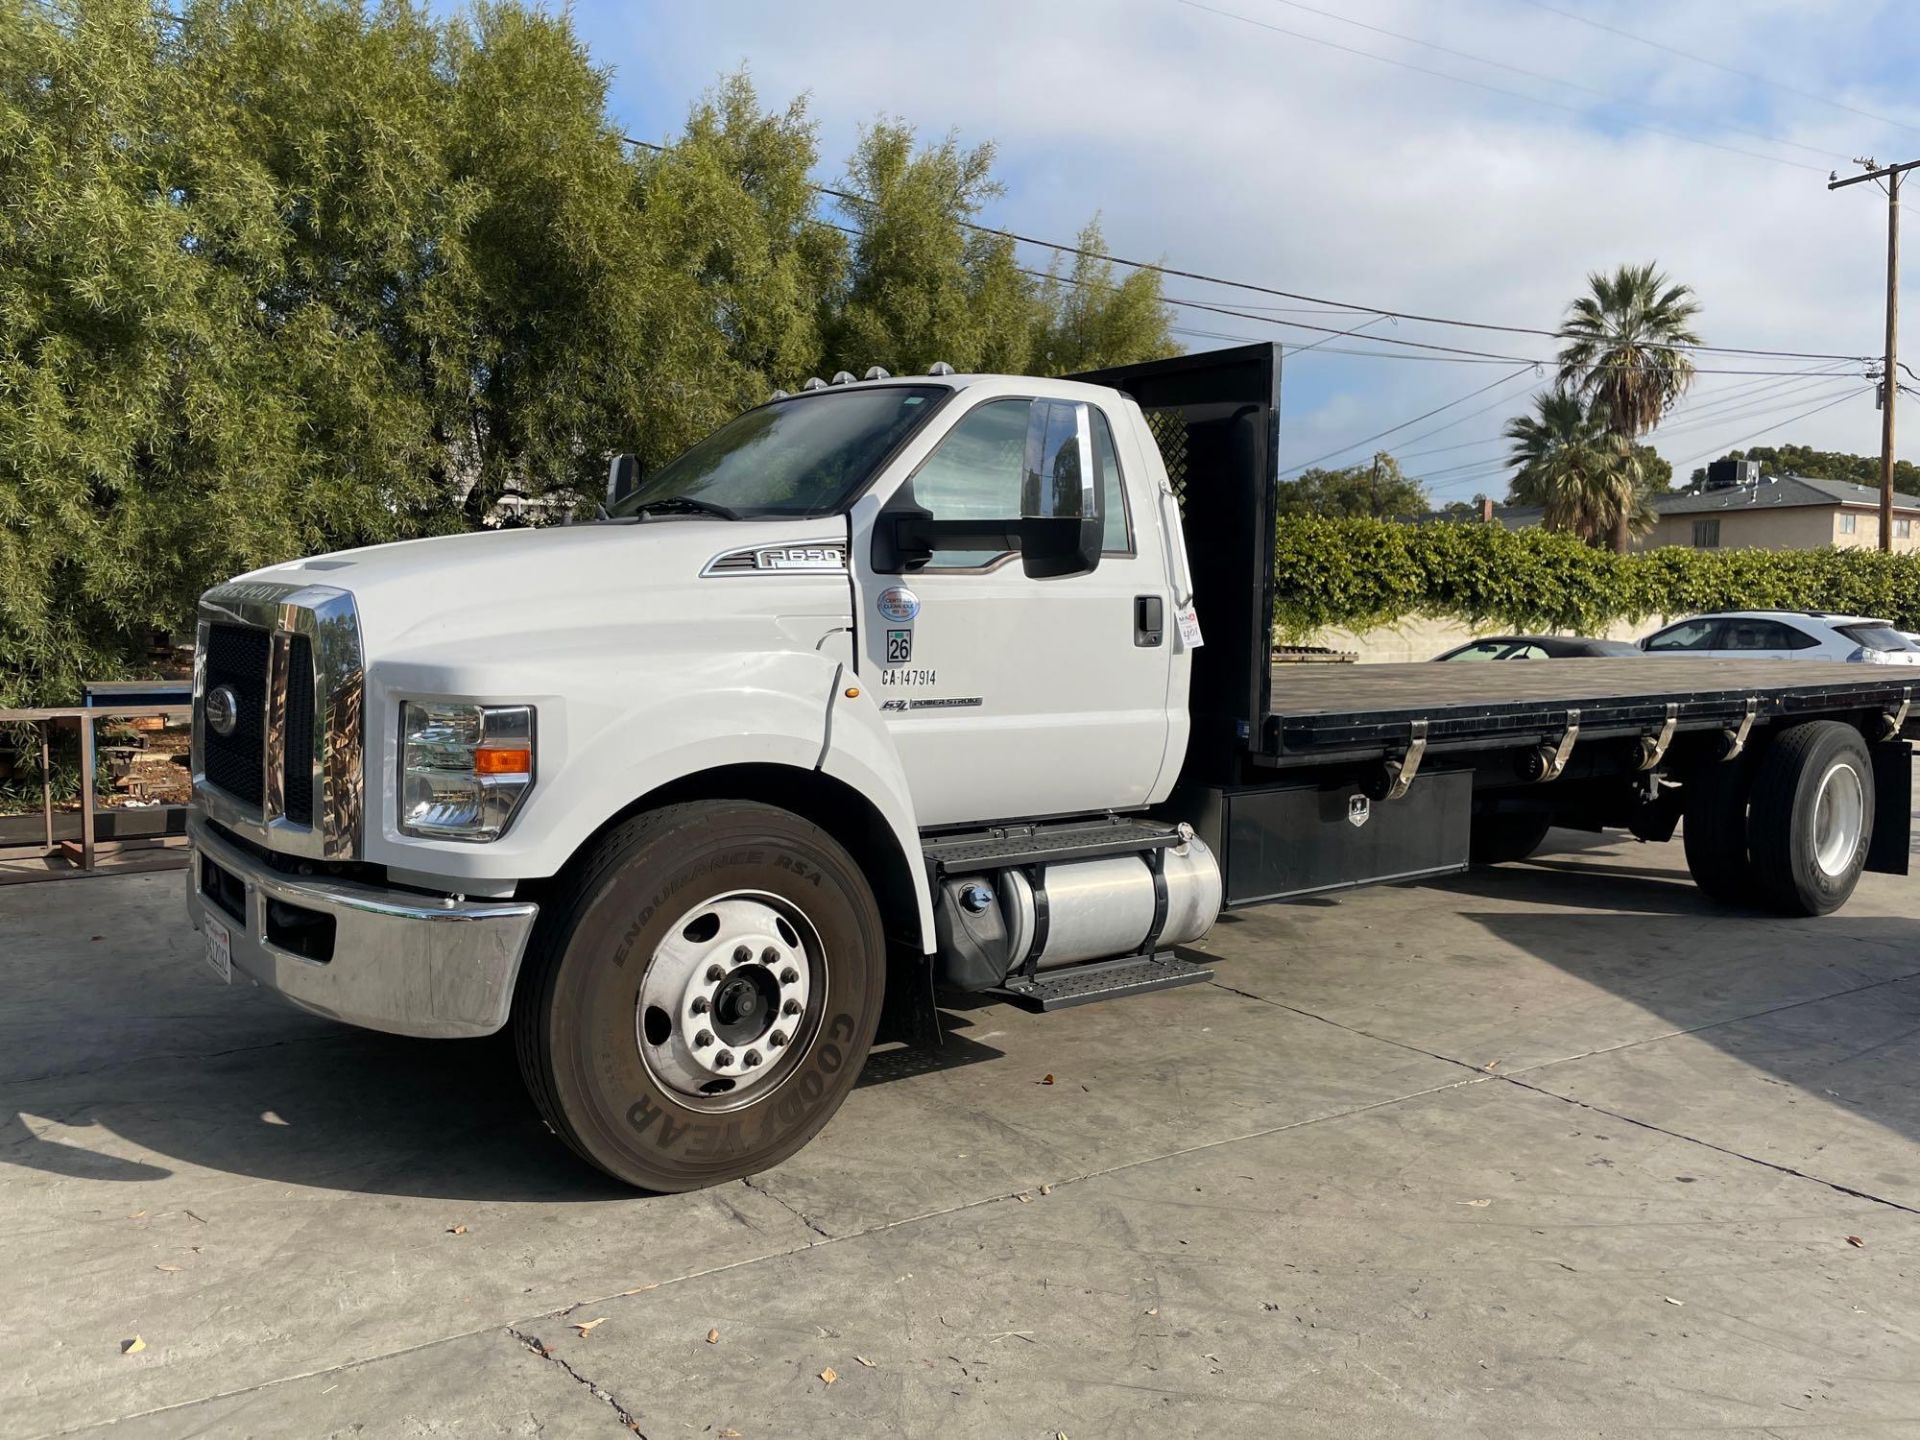 Ford F-650 Super Duty Stake Bed Truck, Dually, Cummins TD, 16,811 Miles, New 2019 - Image 6 of 12